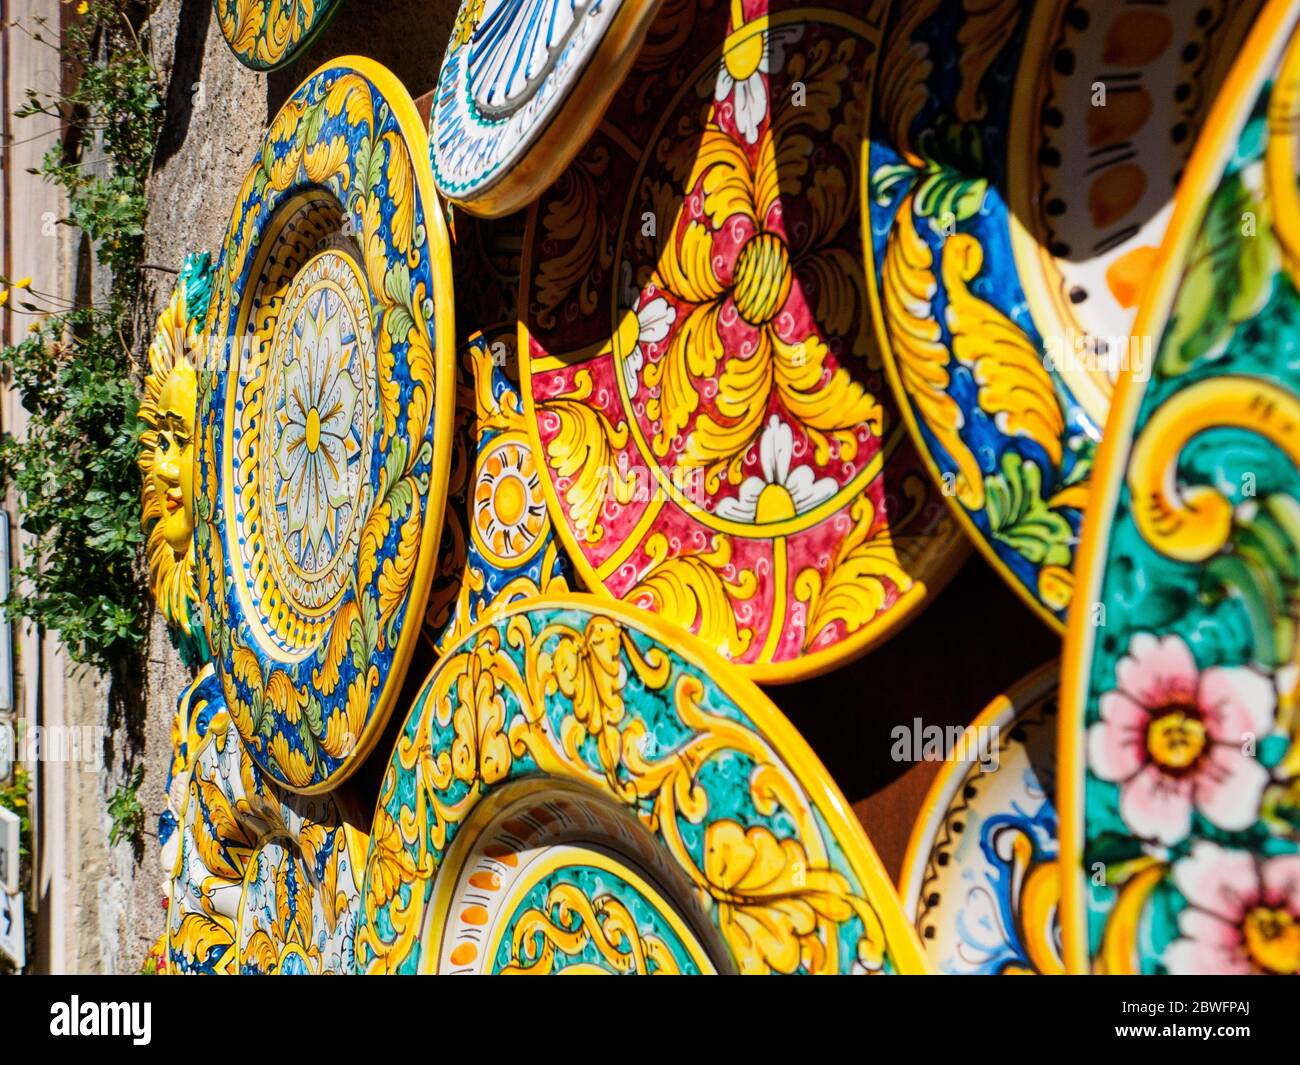 One of the typical artworks of a small town in Sicily, Erice, is the handmade colorful pottery. Stock Photo